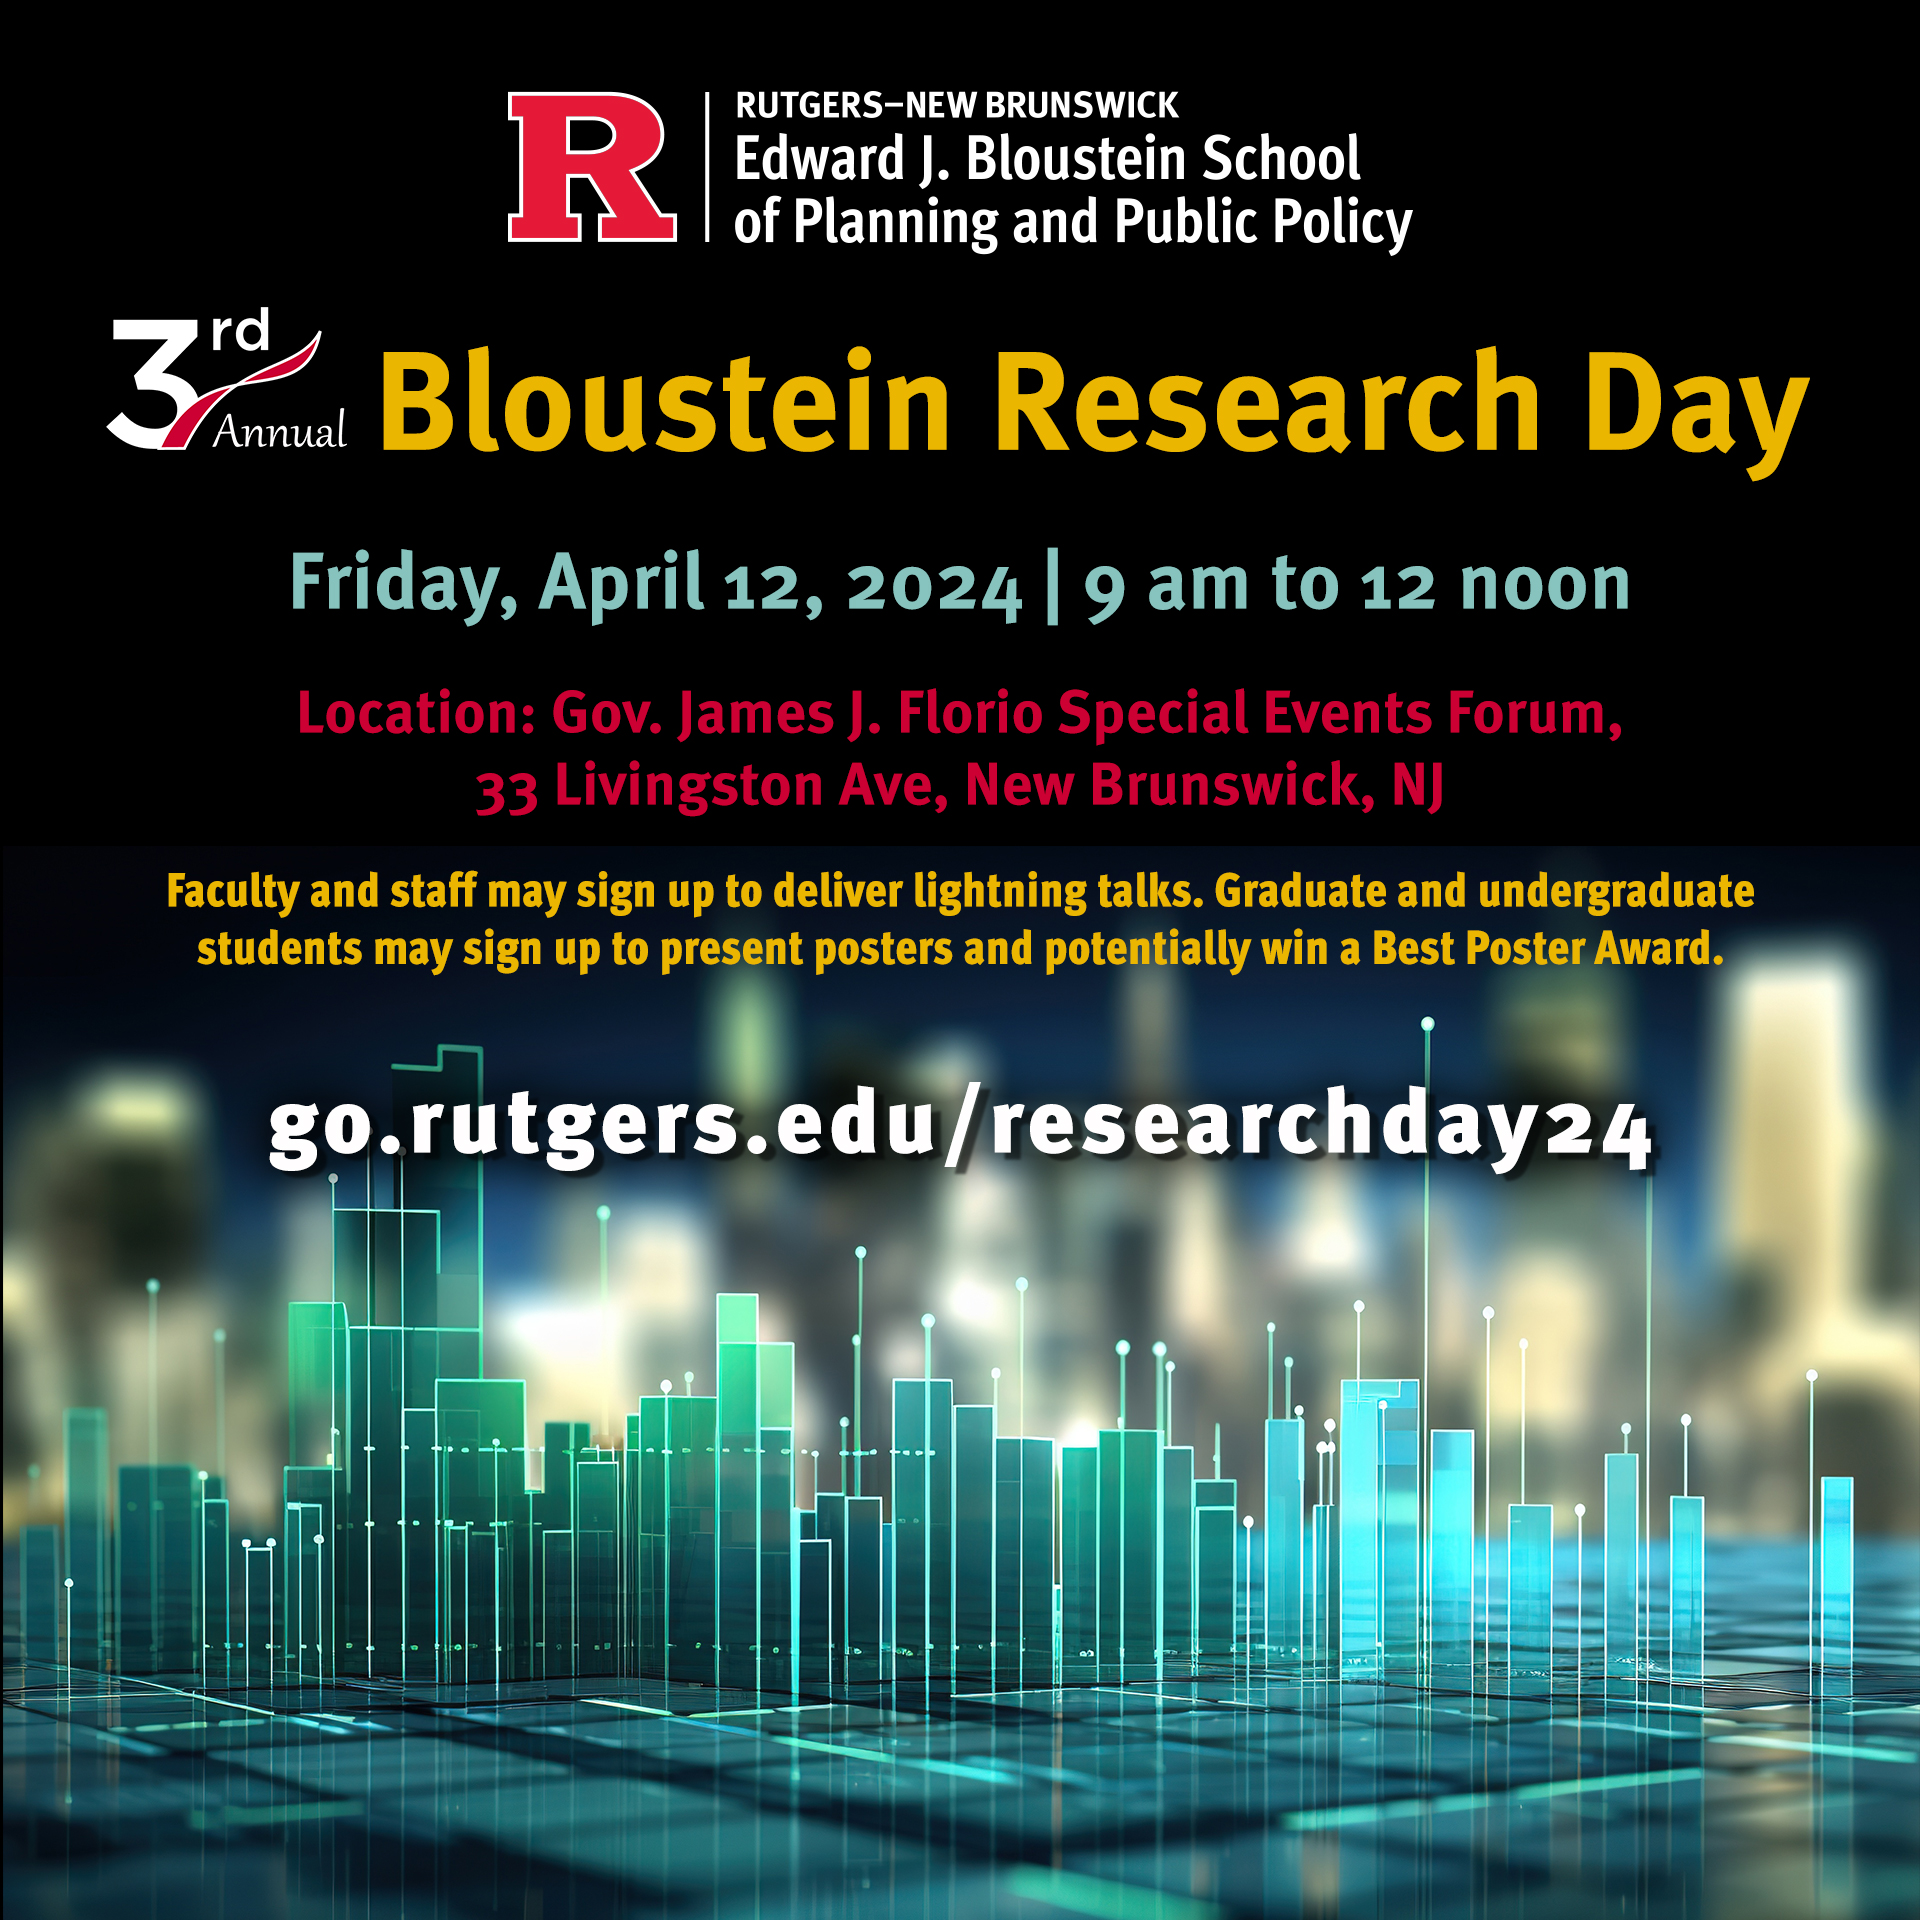 3rd annual Bloustein Research Day